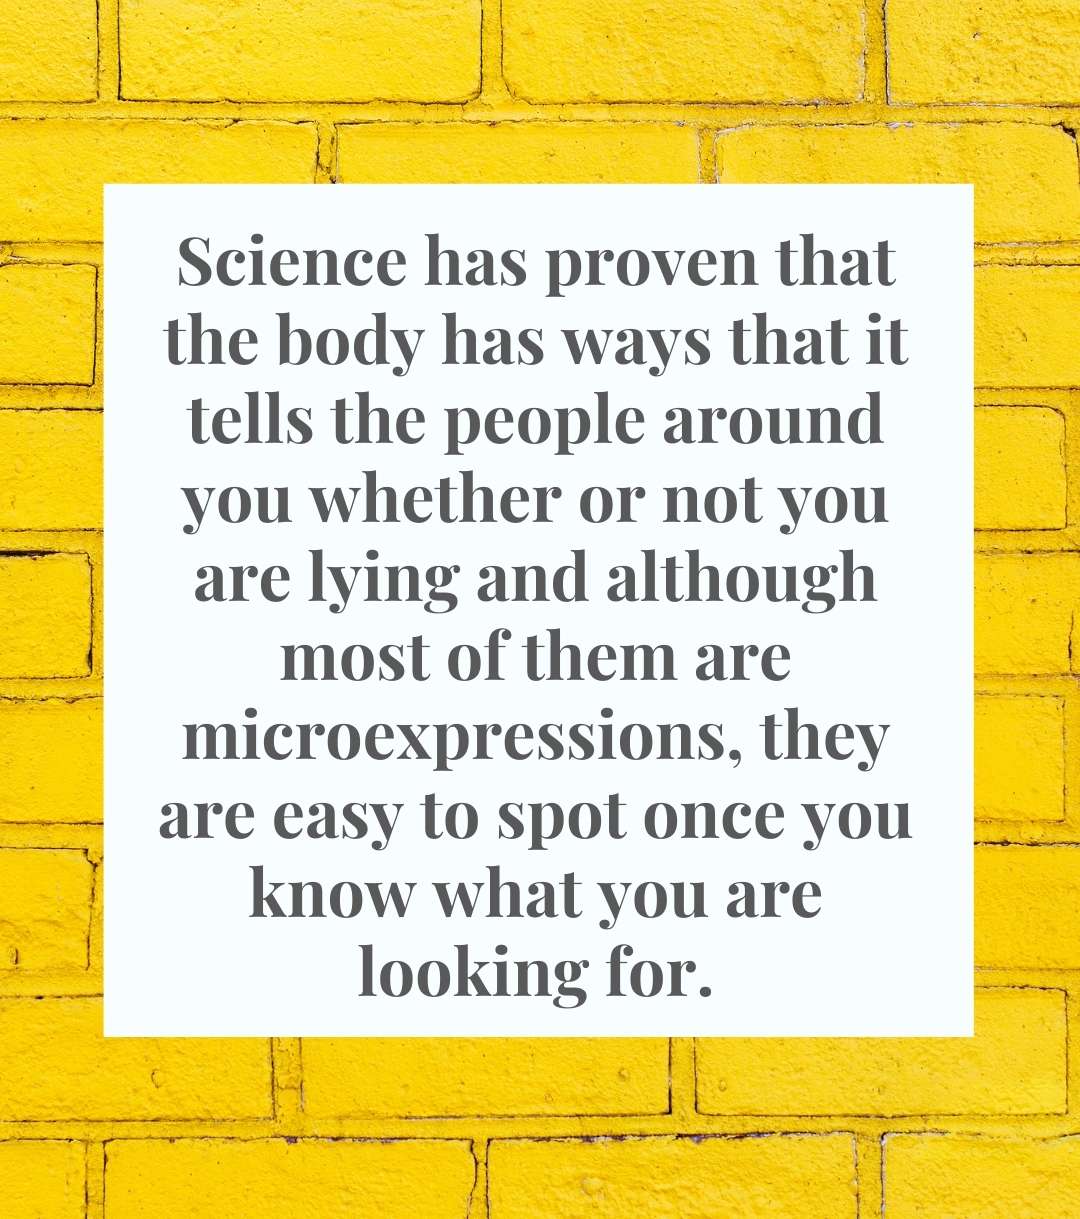 Science has proven that the body has ways that it tells the people around you whether or not you are lying